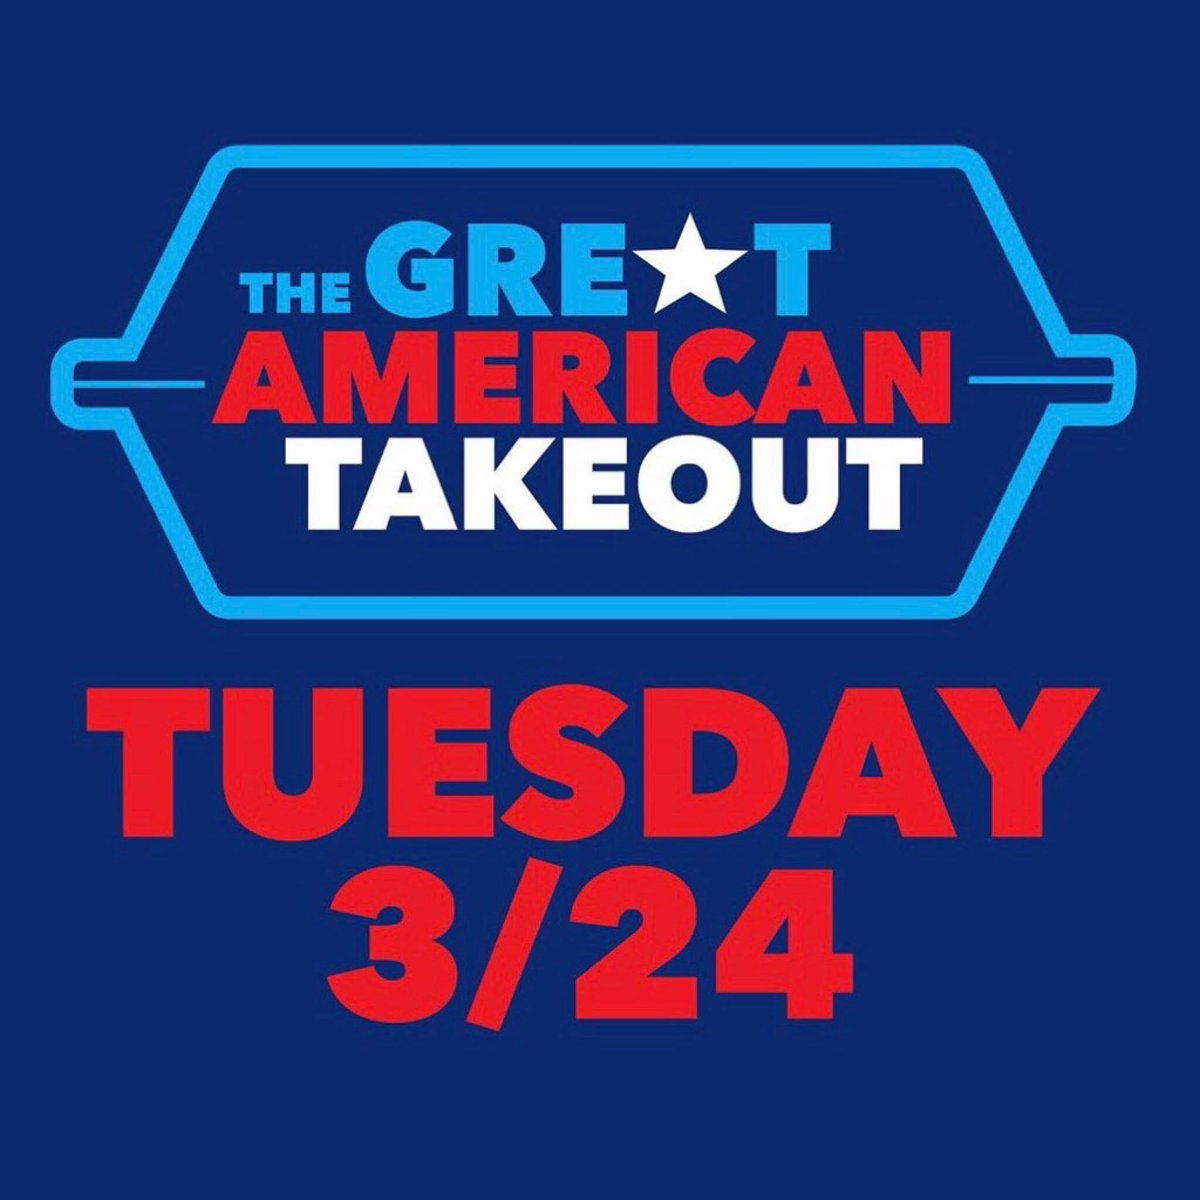 #thegreatamericantakeout Consumers today are being urged to order at least one delivery or pick-up meal on Tuesday to show support for the restaurant industry. Don’t forget to share photos on social media showing some ❤️ for your favorite spots along with the official hashtag!